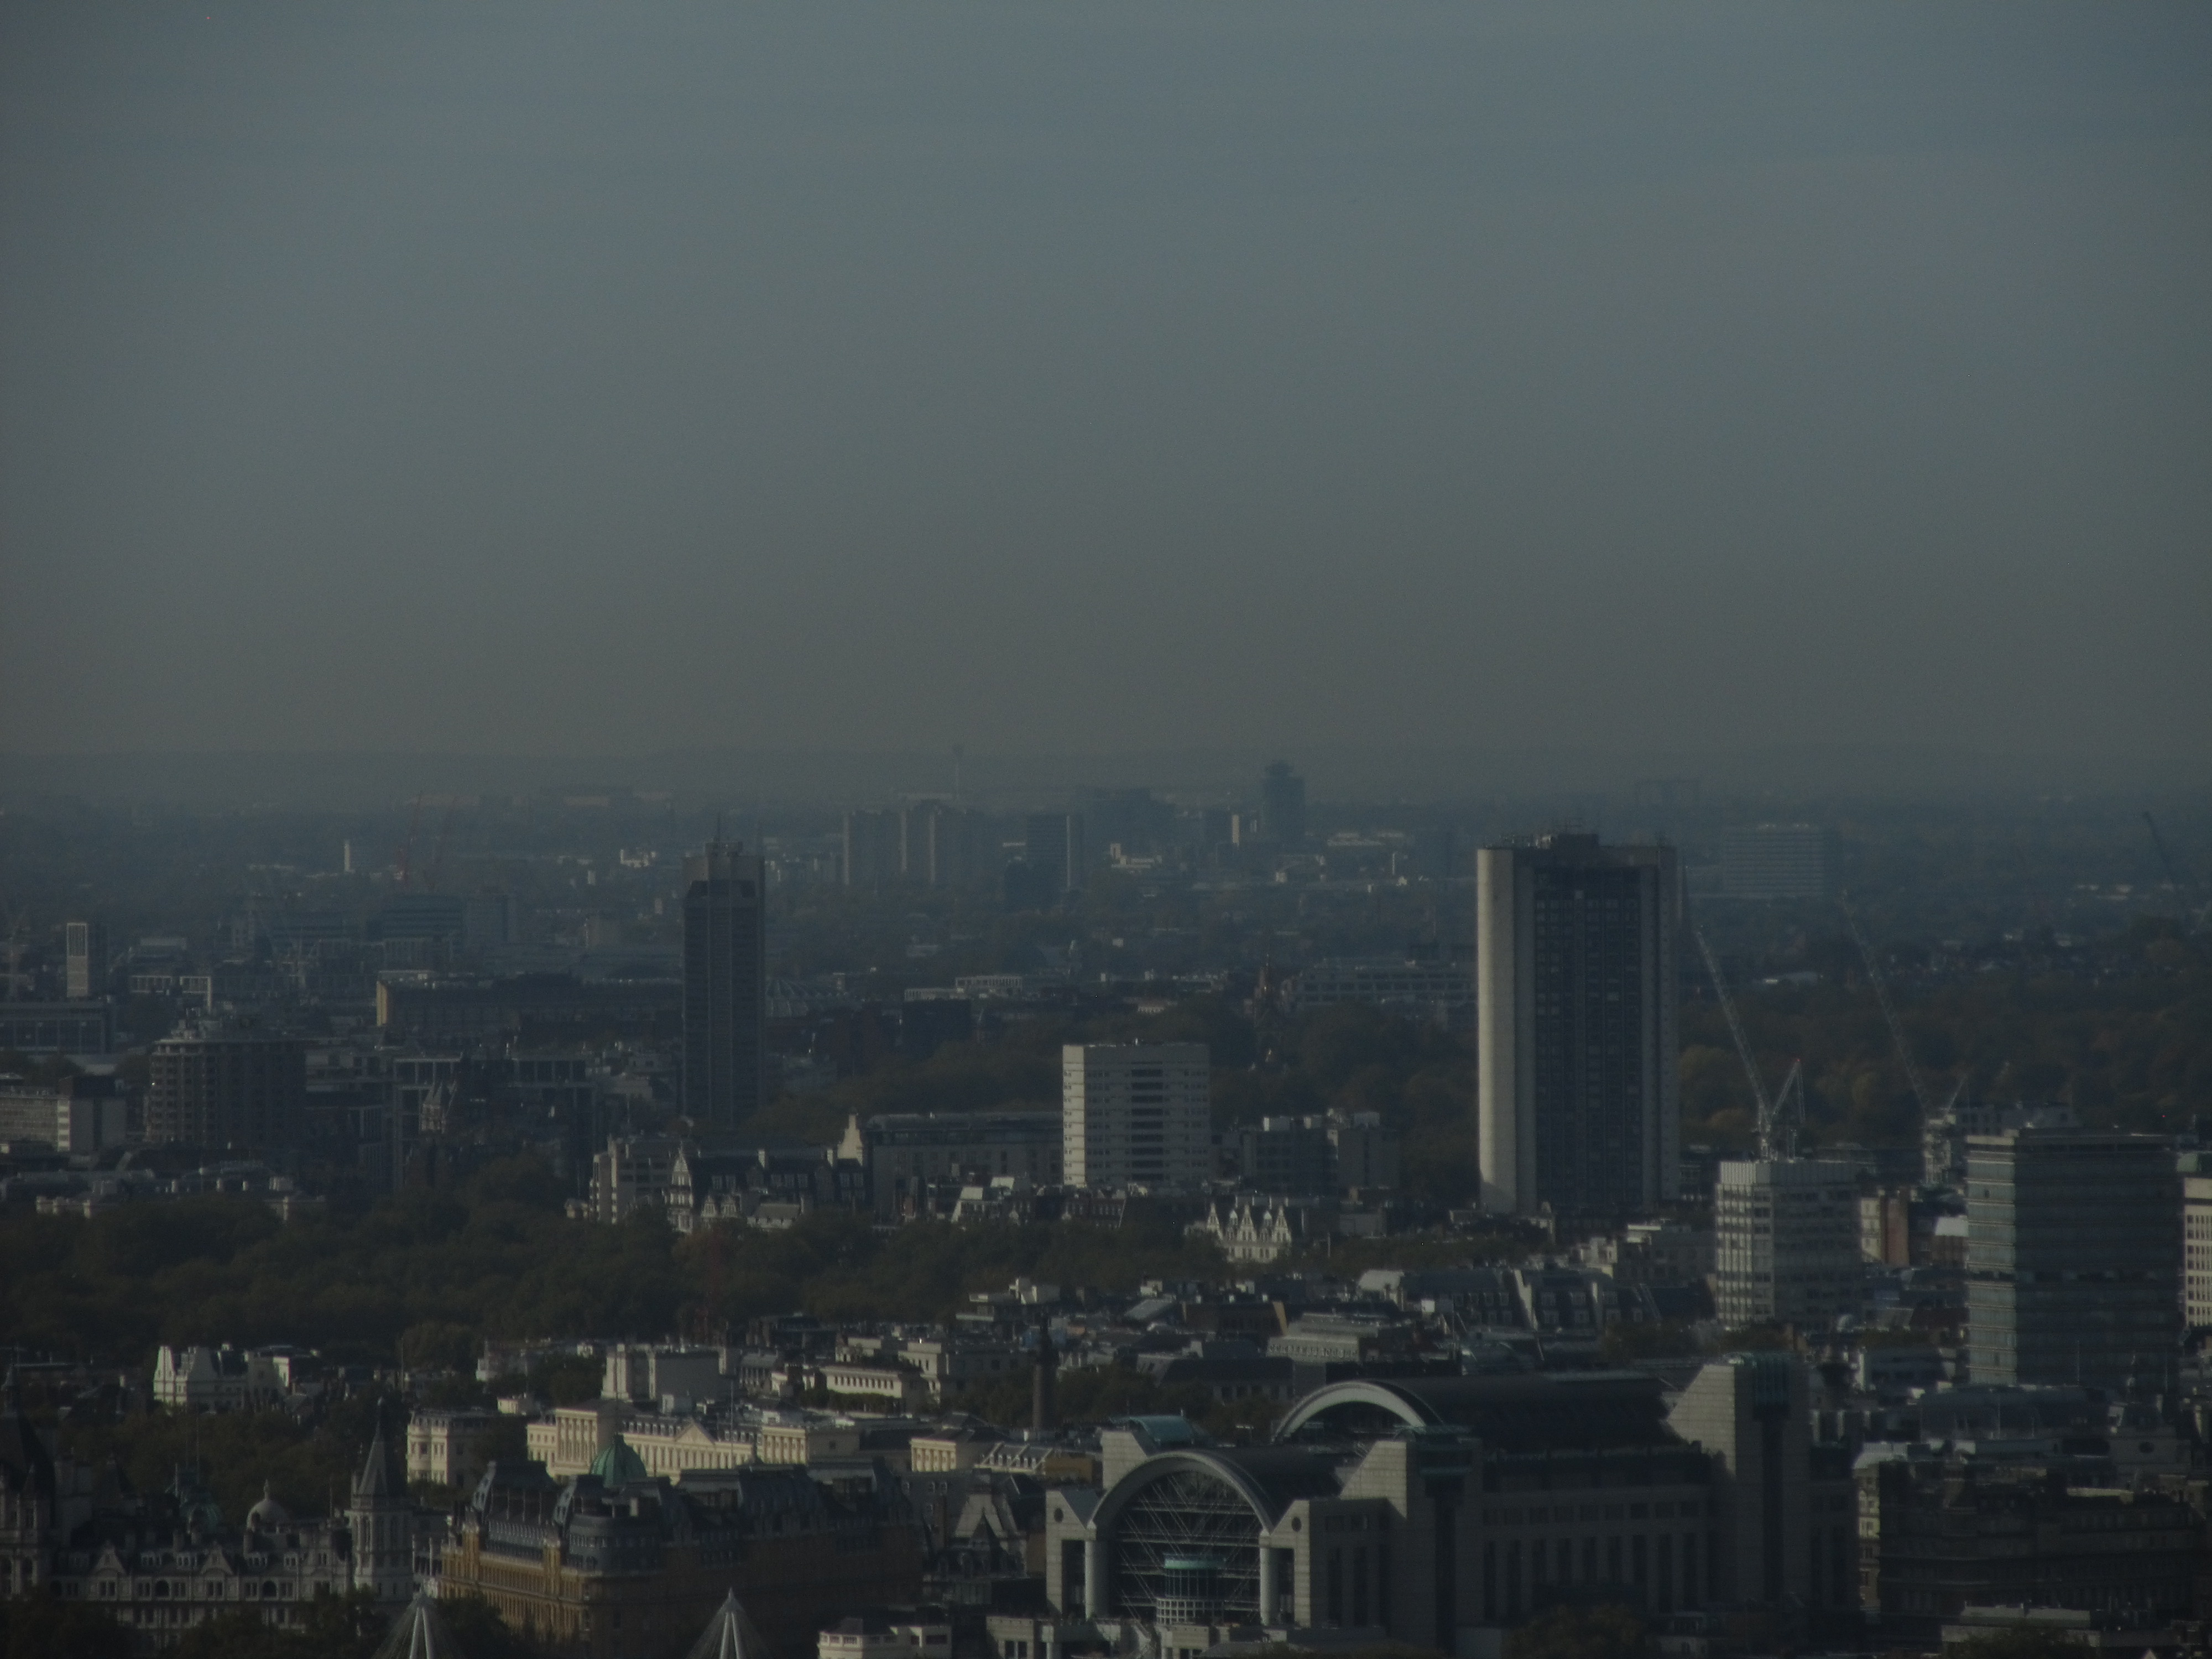 London Hilton Building and Heathrow Airport seen from the Walkie Talkie Sky Garden